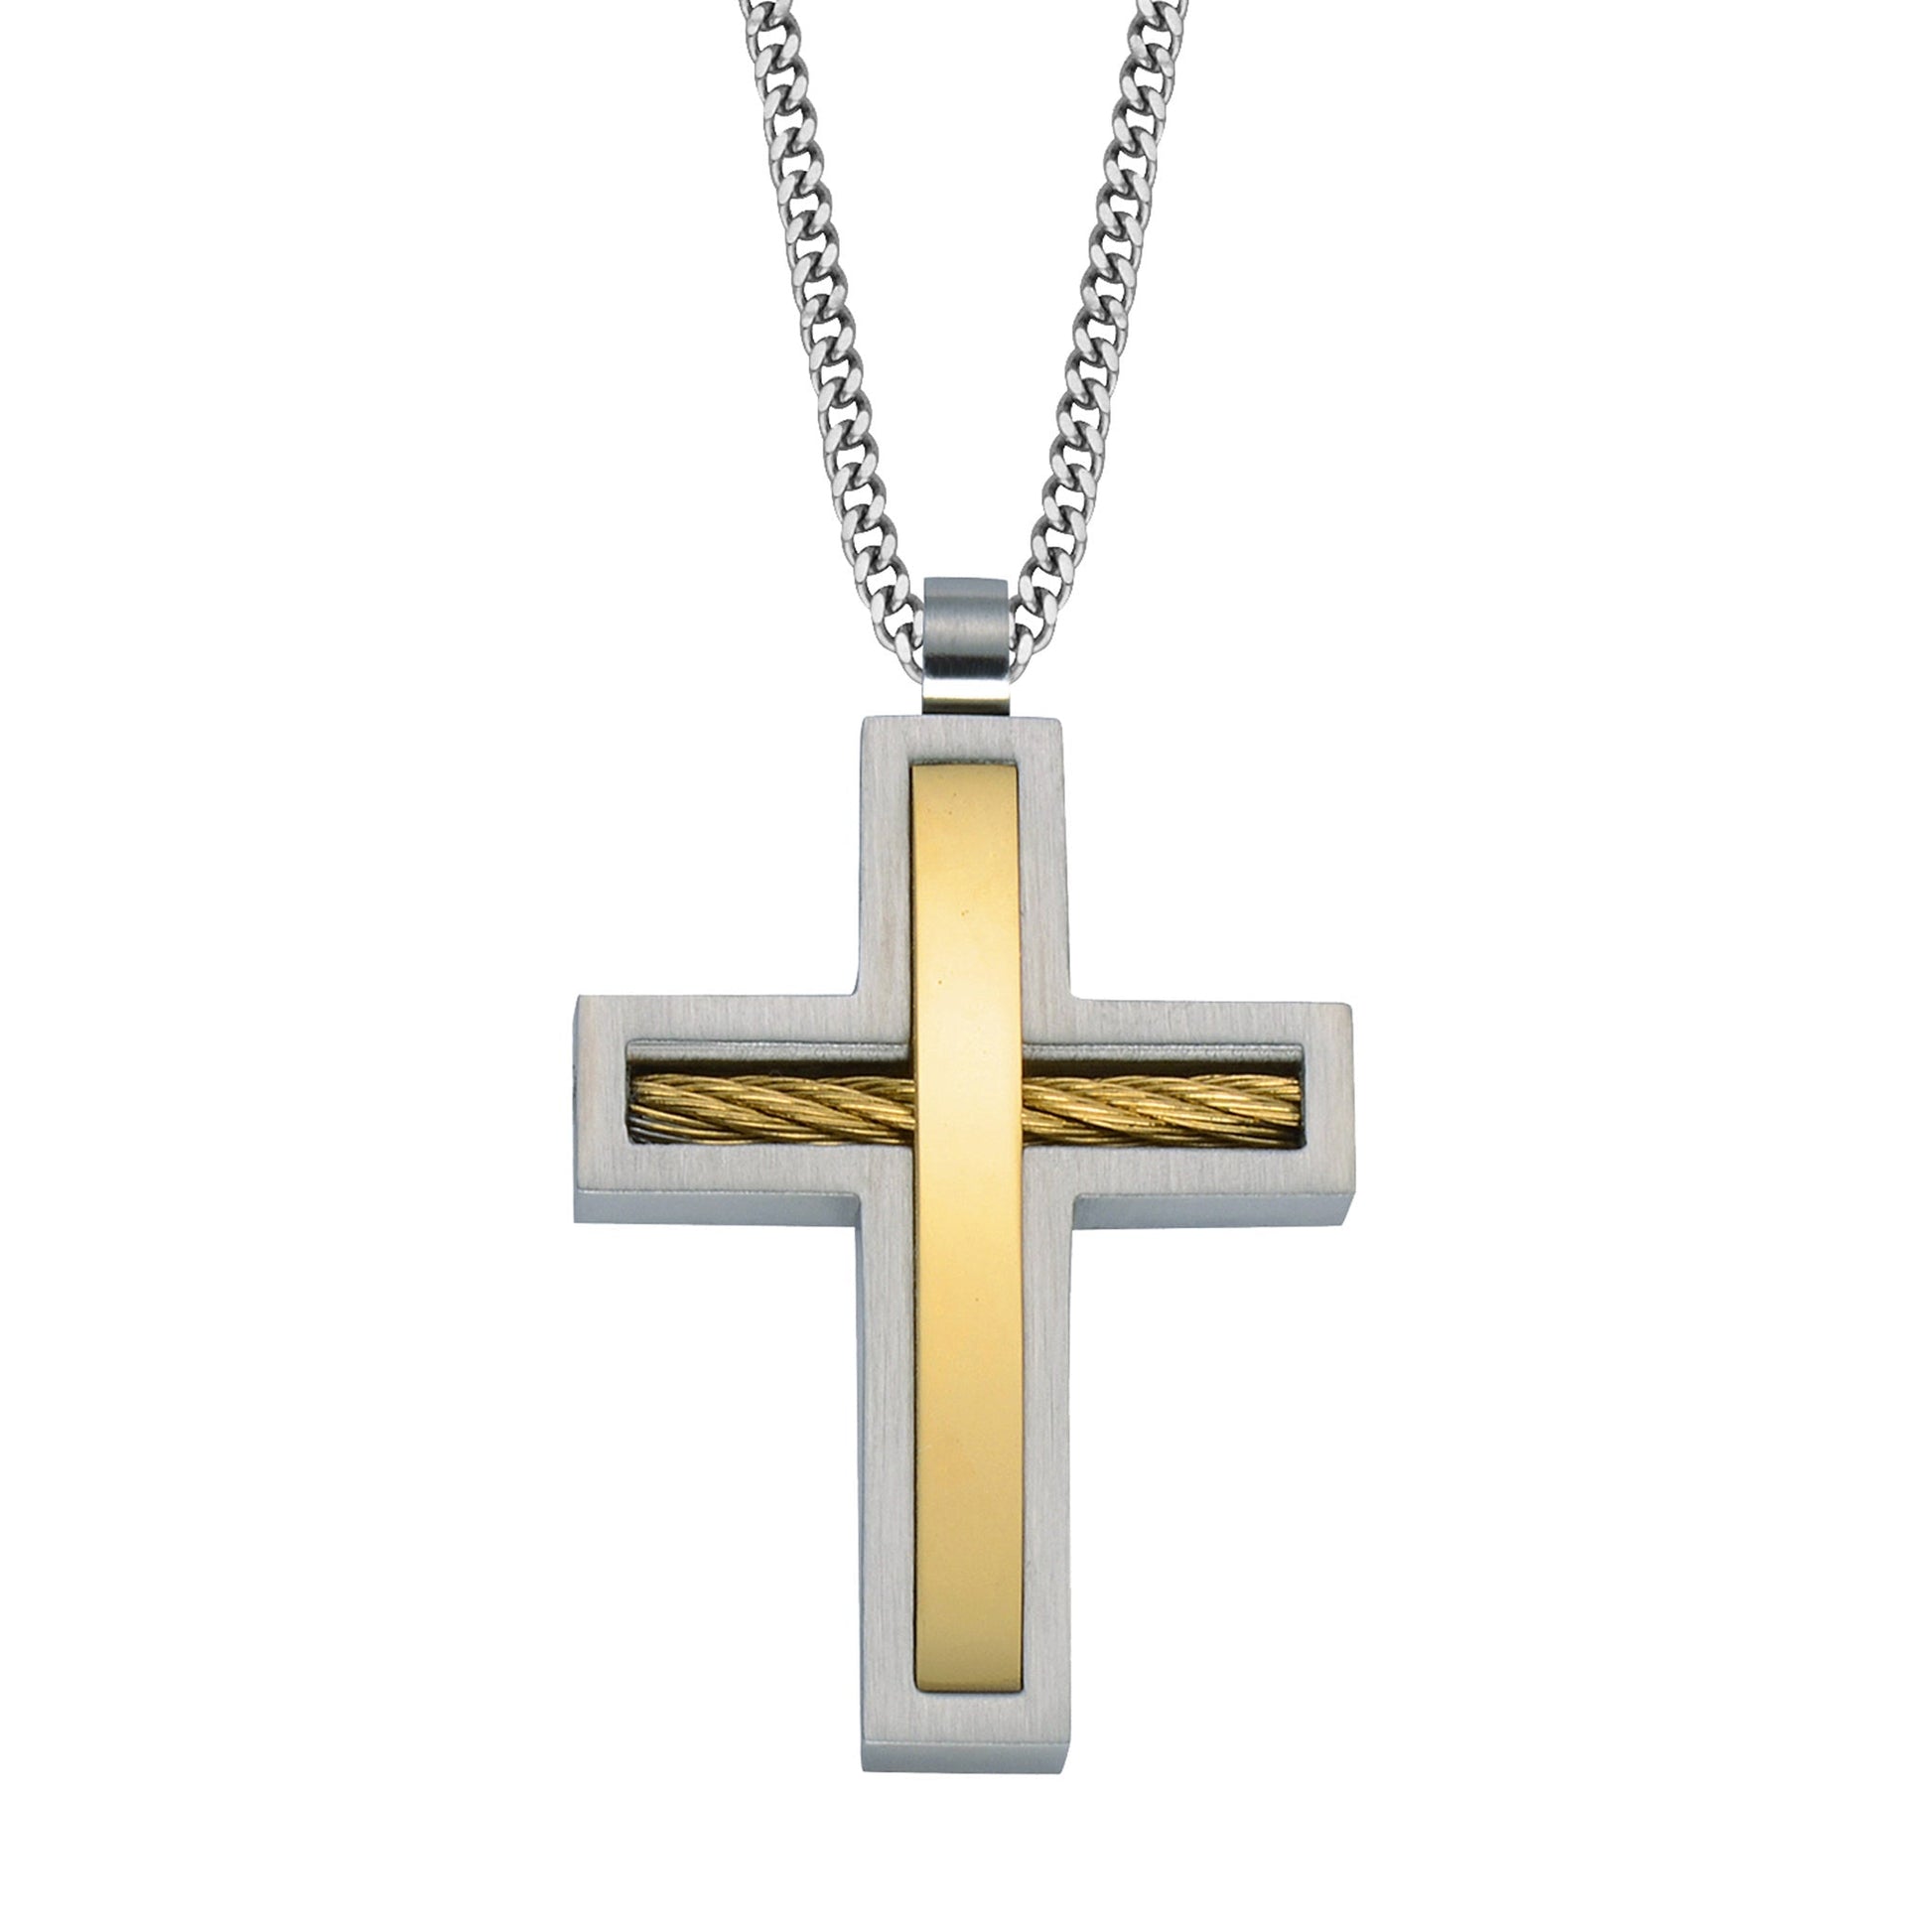 A stainless steel two-tone silver & gold cross on 24" chain displayed on a neutral white background.